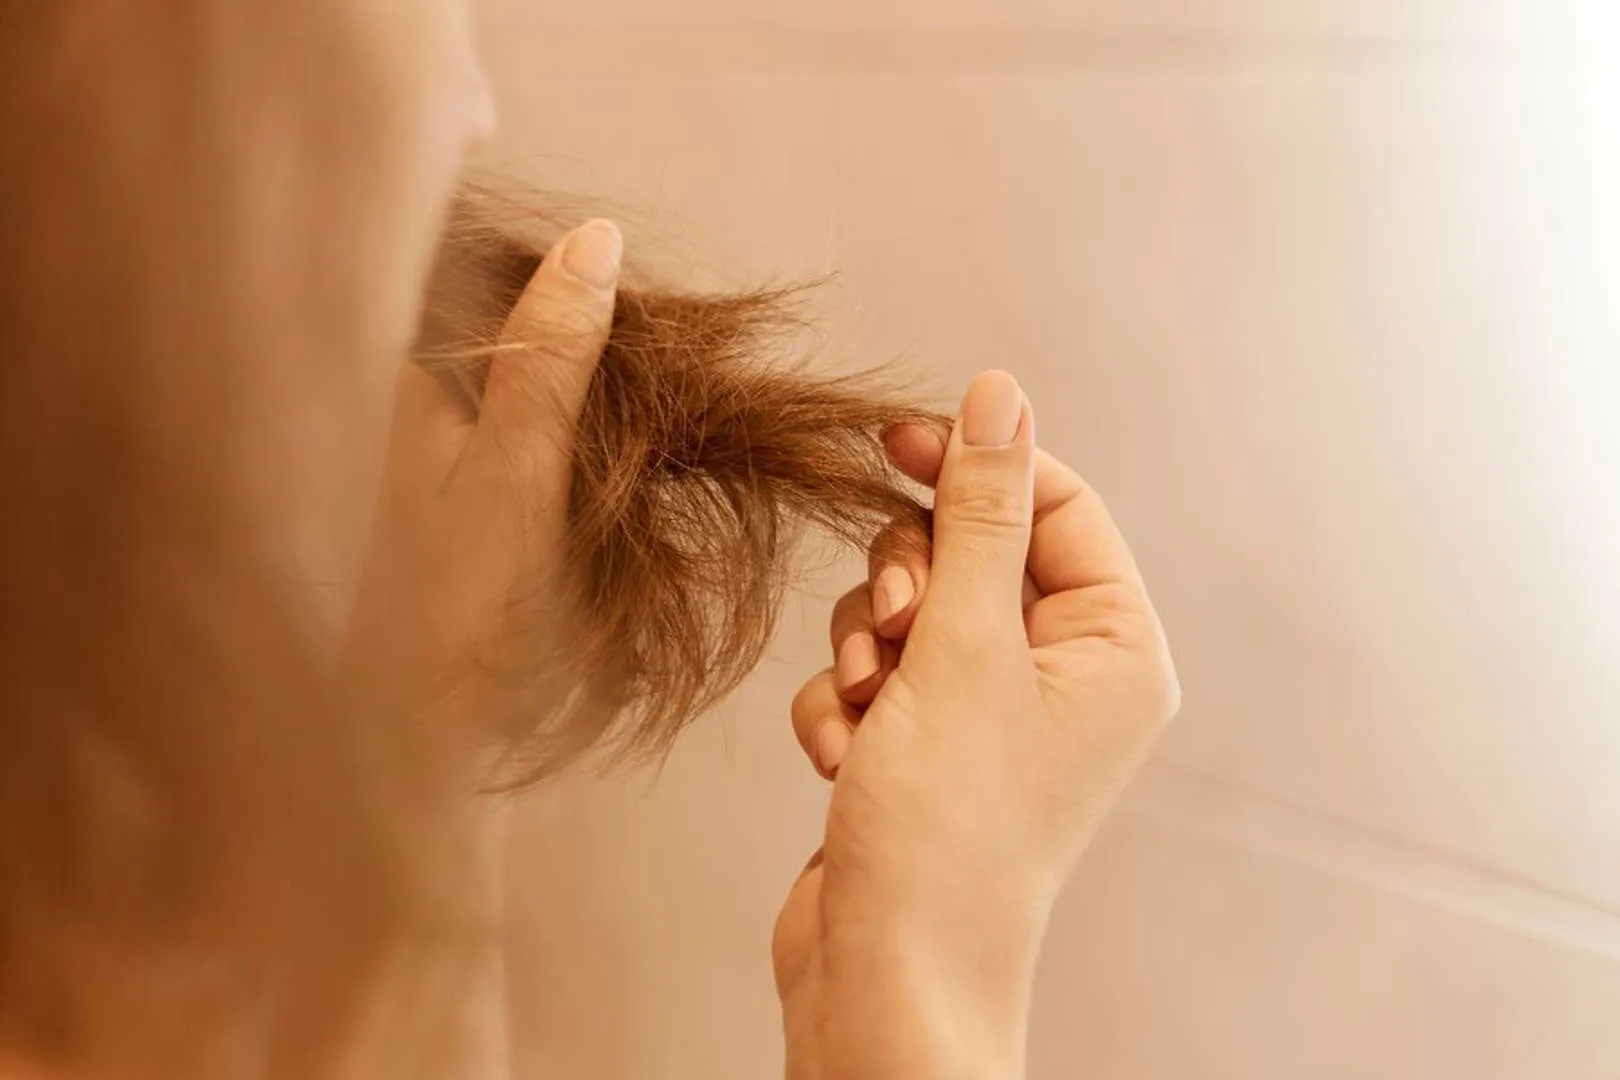 Due to these reasons hair becomes thin and lifeless